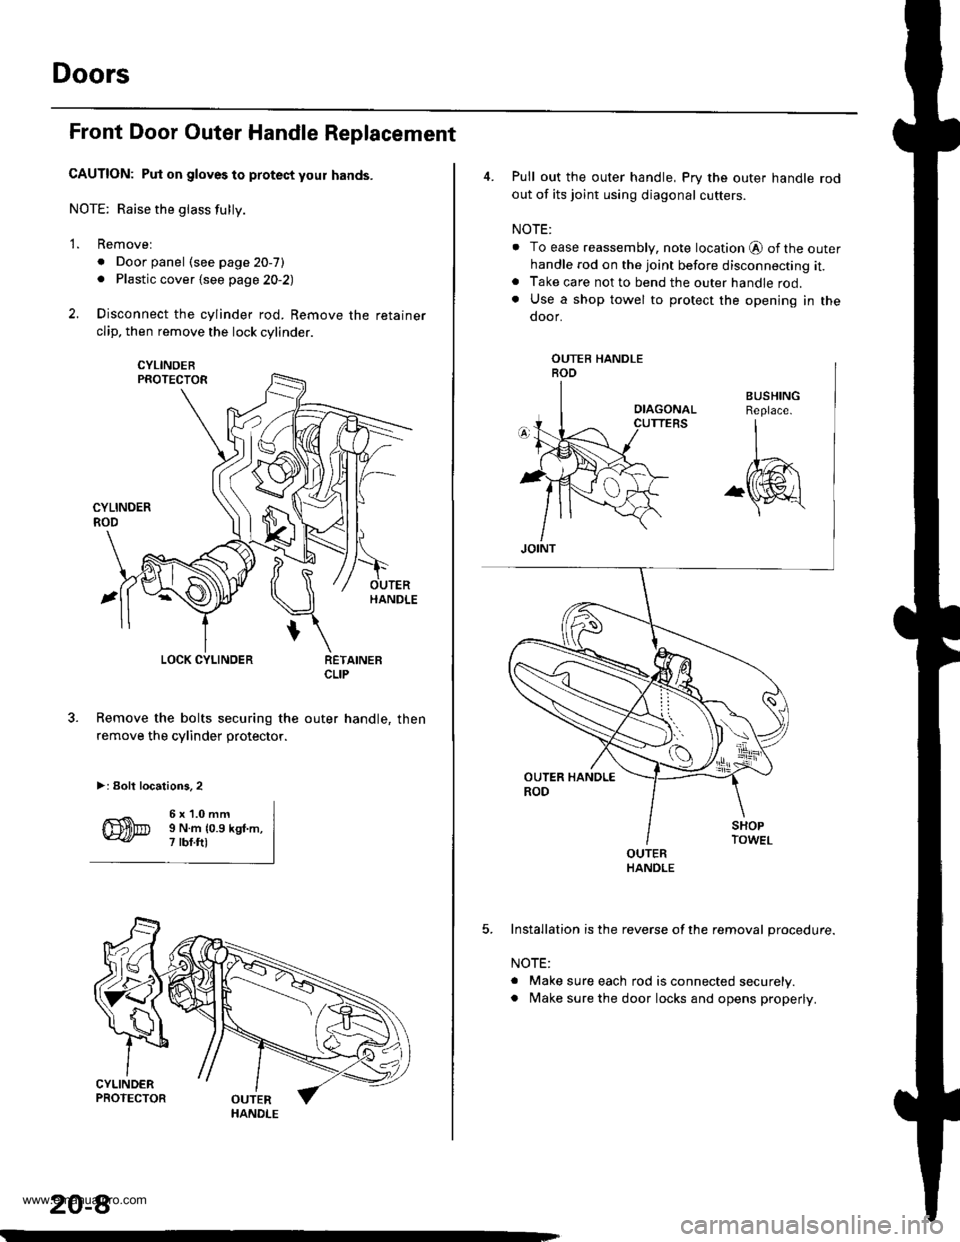 HONDA CR-V 1999 RD1-RD3 / 1.G Workshop Manual 
Doors
Front Door Outer Handle Replacement
CAUTION: Put on gloves to protect your hands.
NOTE; Raise the glass fully.
2.
1.Removel
. Door panel (see page 20-7). Plastic cover {see page 2O-2)
Disconnec